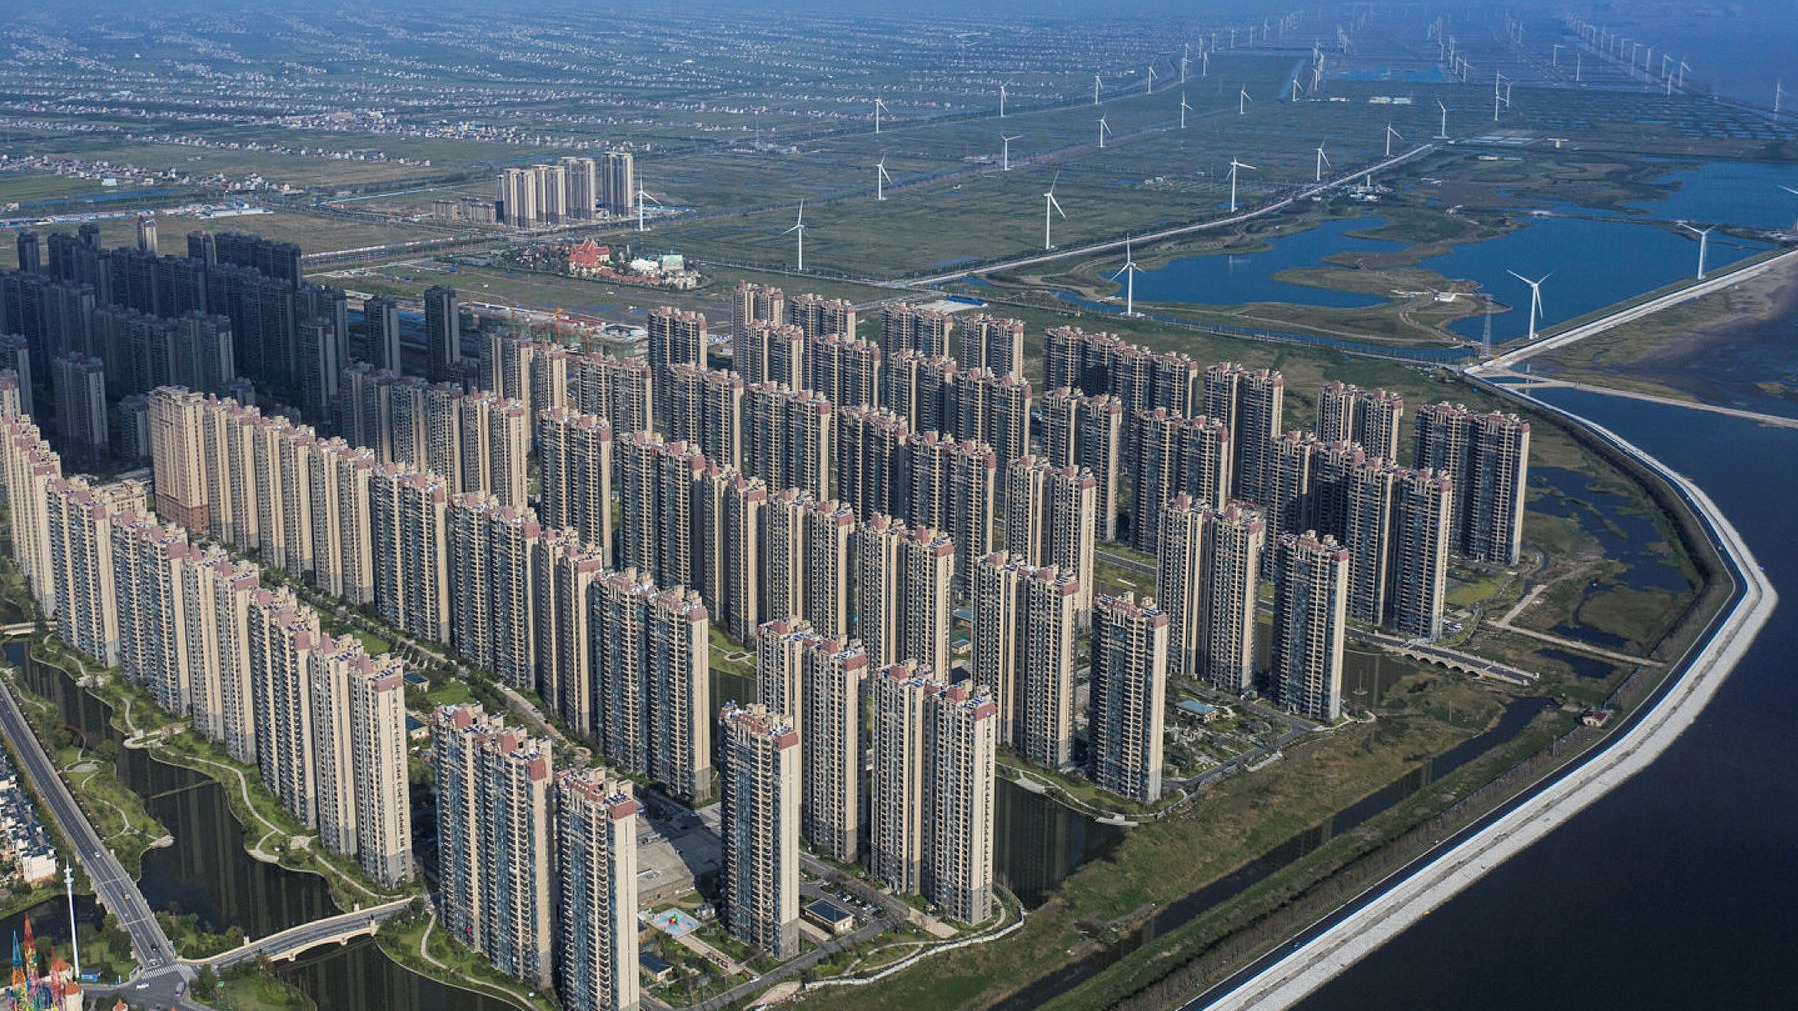 Bird's eye view of a large series of waterfront apartment blocks in Qidong, China.